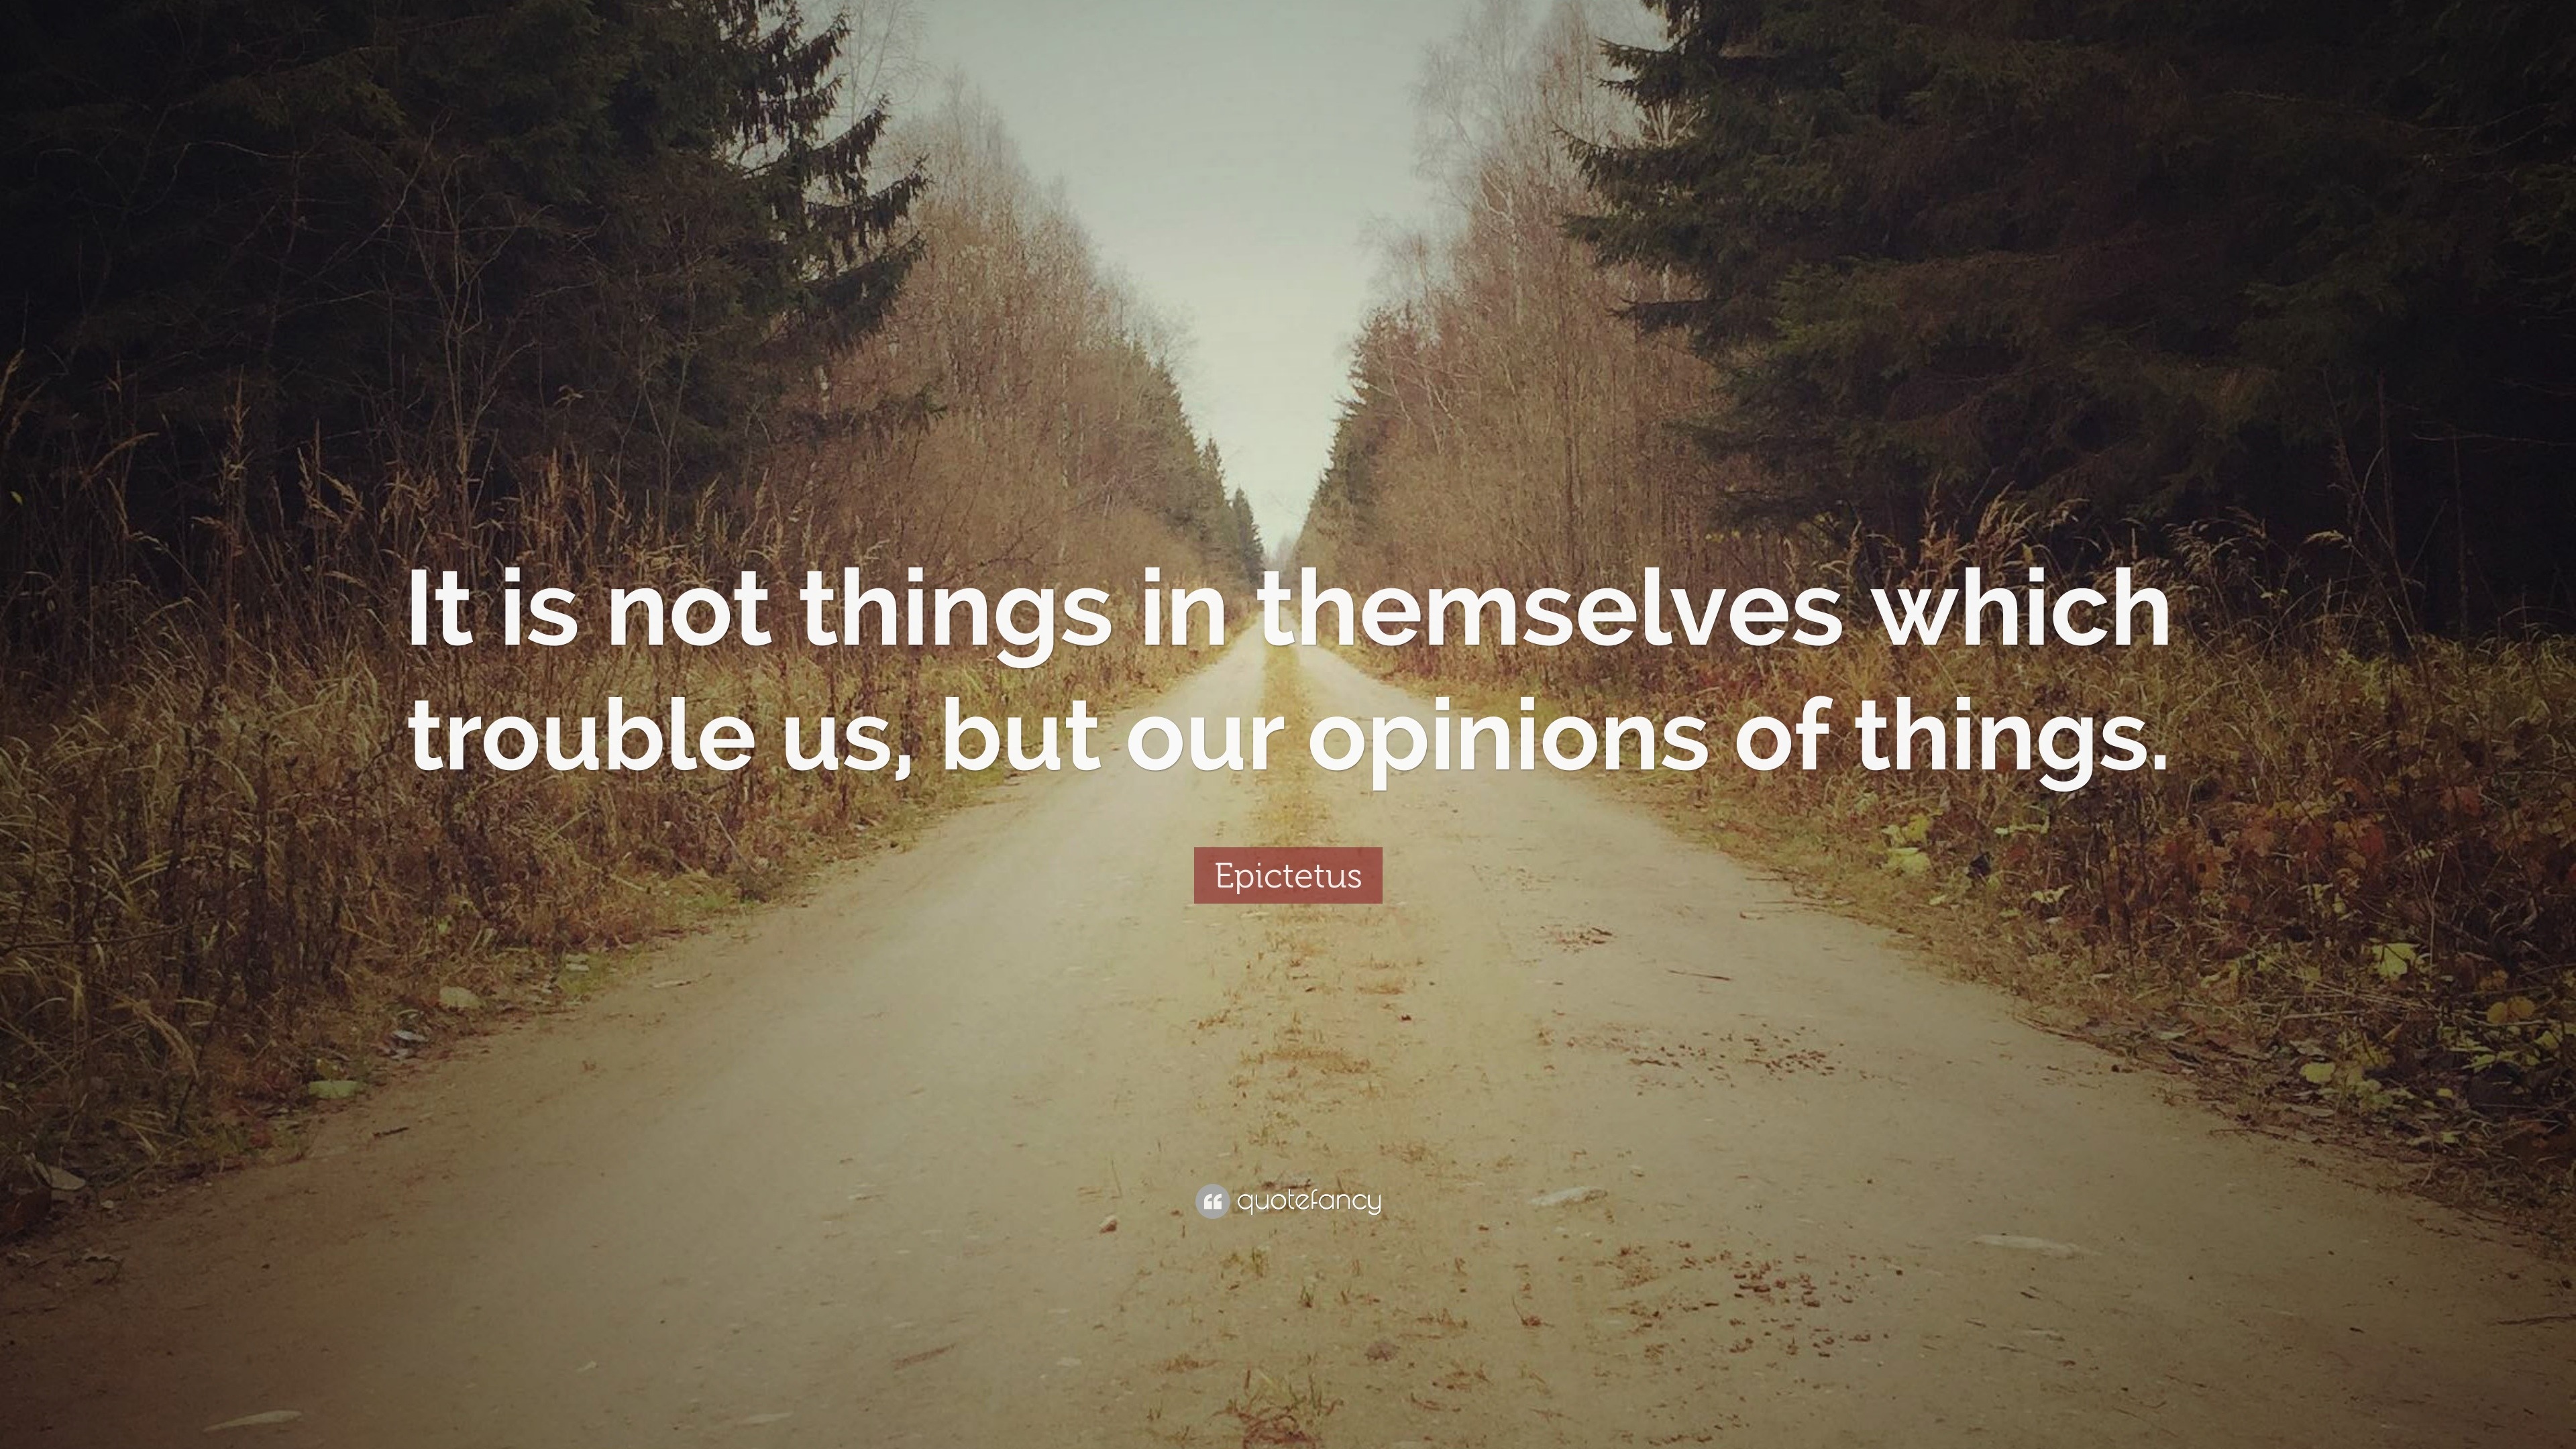 216648-Epictetus-Quote-It-is-not-things-in-themselves-which-trouble-us.jpg